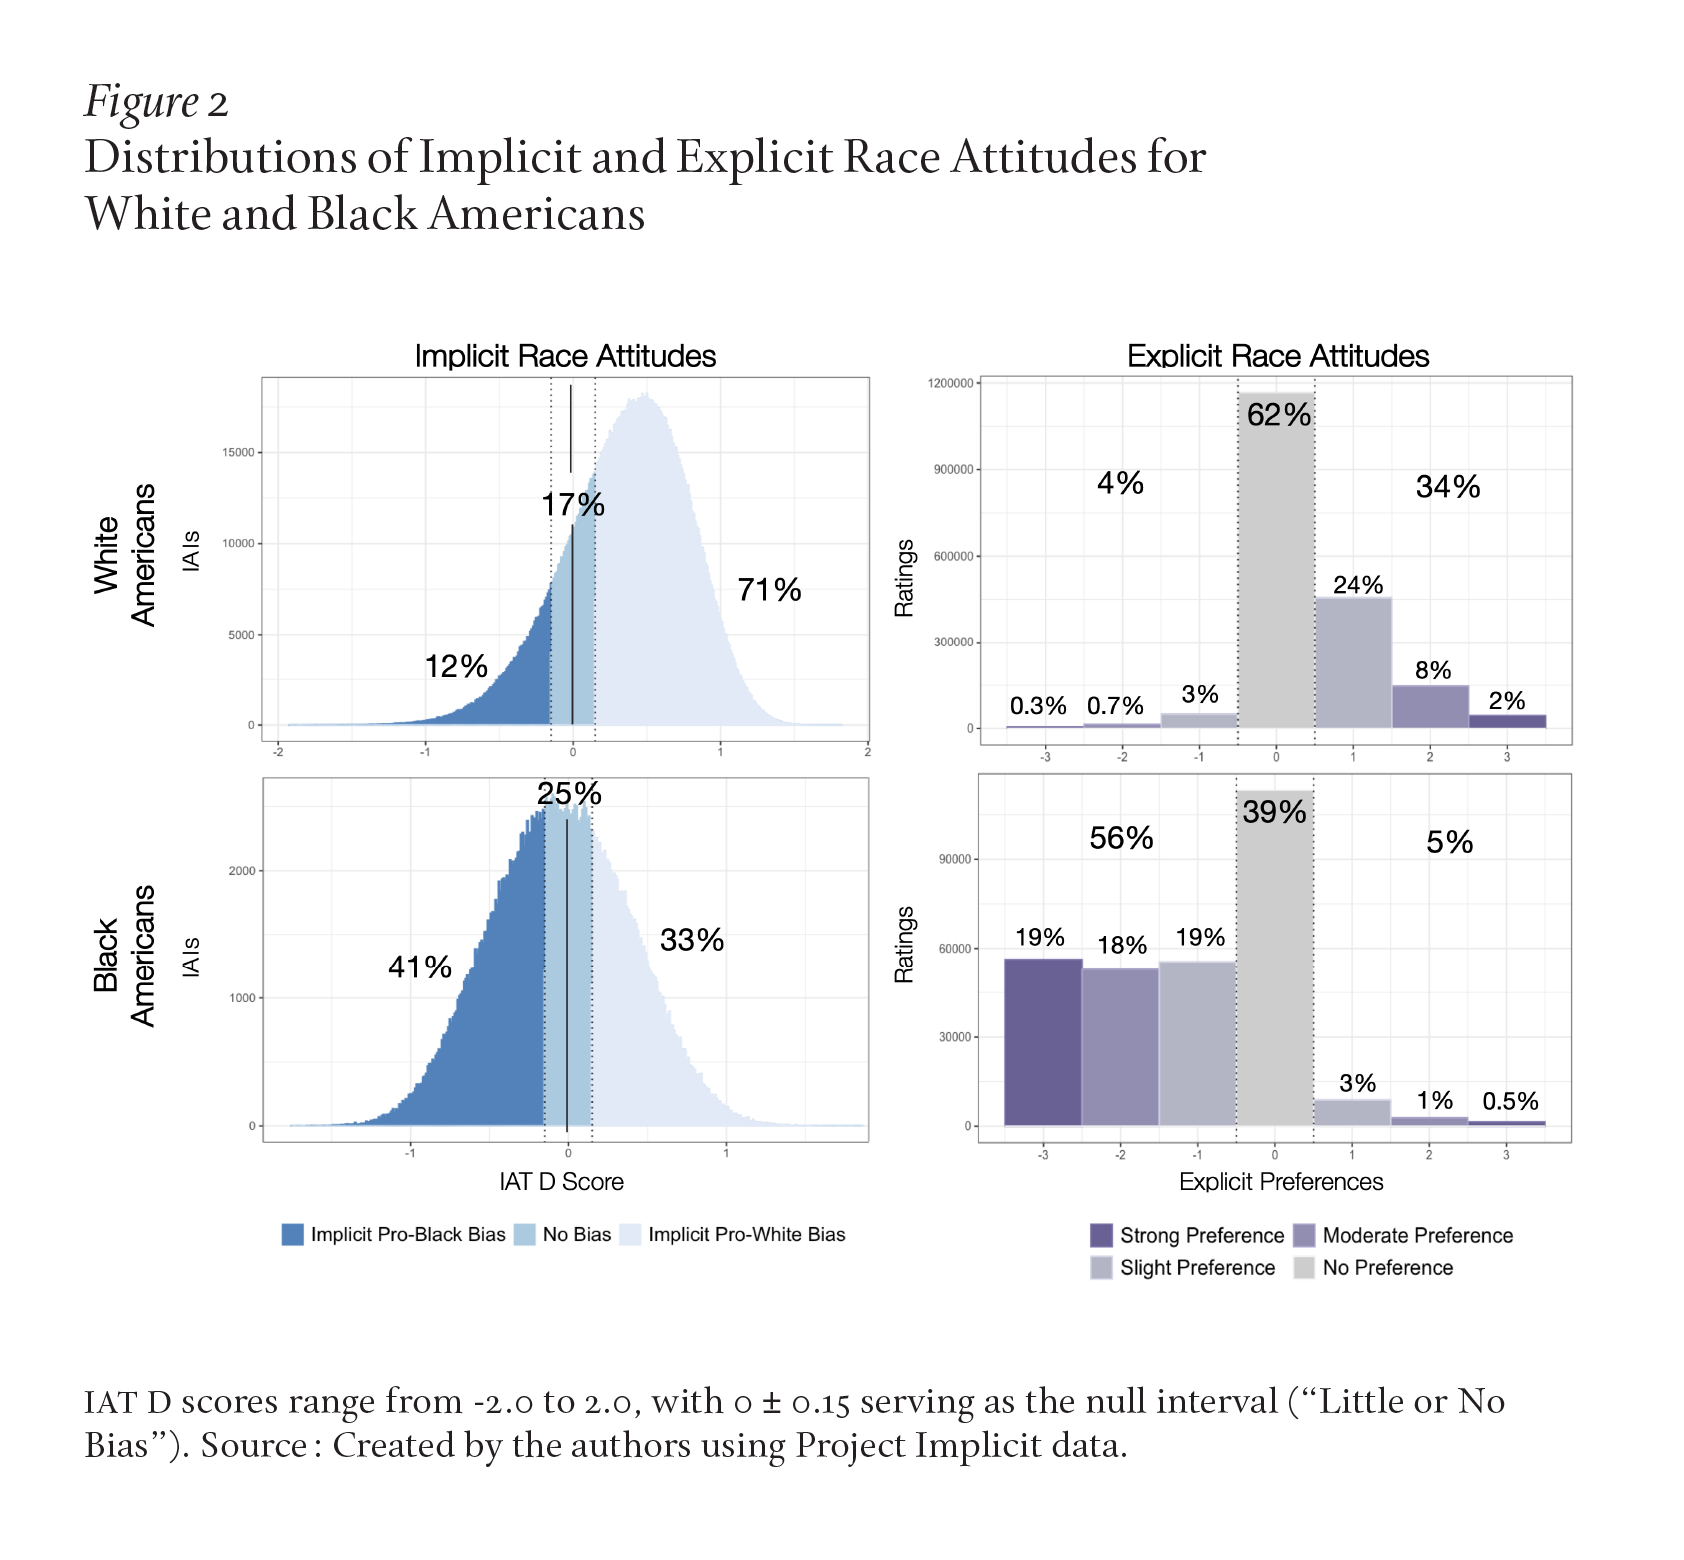 Four charts compare the rates of explicit and implicit bias toward Black Americans and white Americans. White respondents showed bias toward Black Americans at 12%, white Americans at 71%, and no implicit bias at 17%, but 62% claimed they had no bias. Black respondents showed implicit bias toward Black Americans at 12%, white Americans at 71%, and no implicit bias at 17%, but 39% claimed they had no bias.